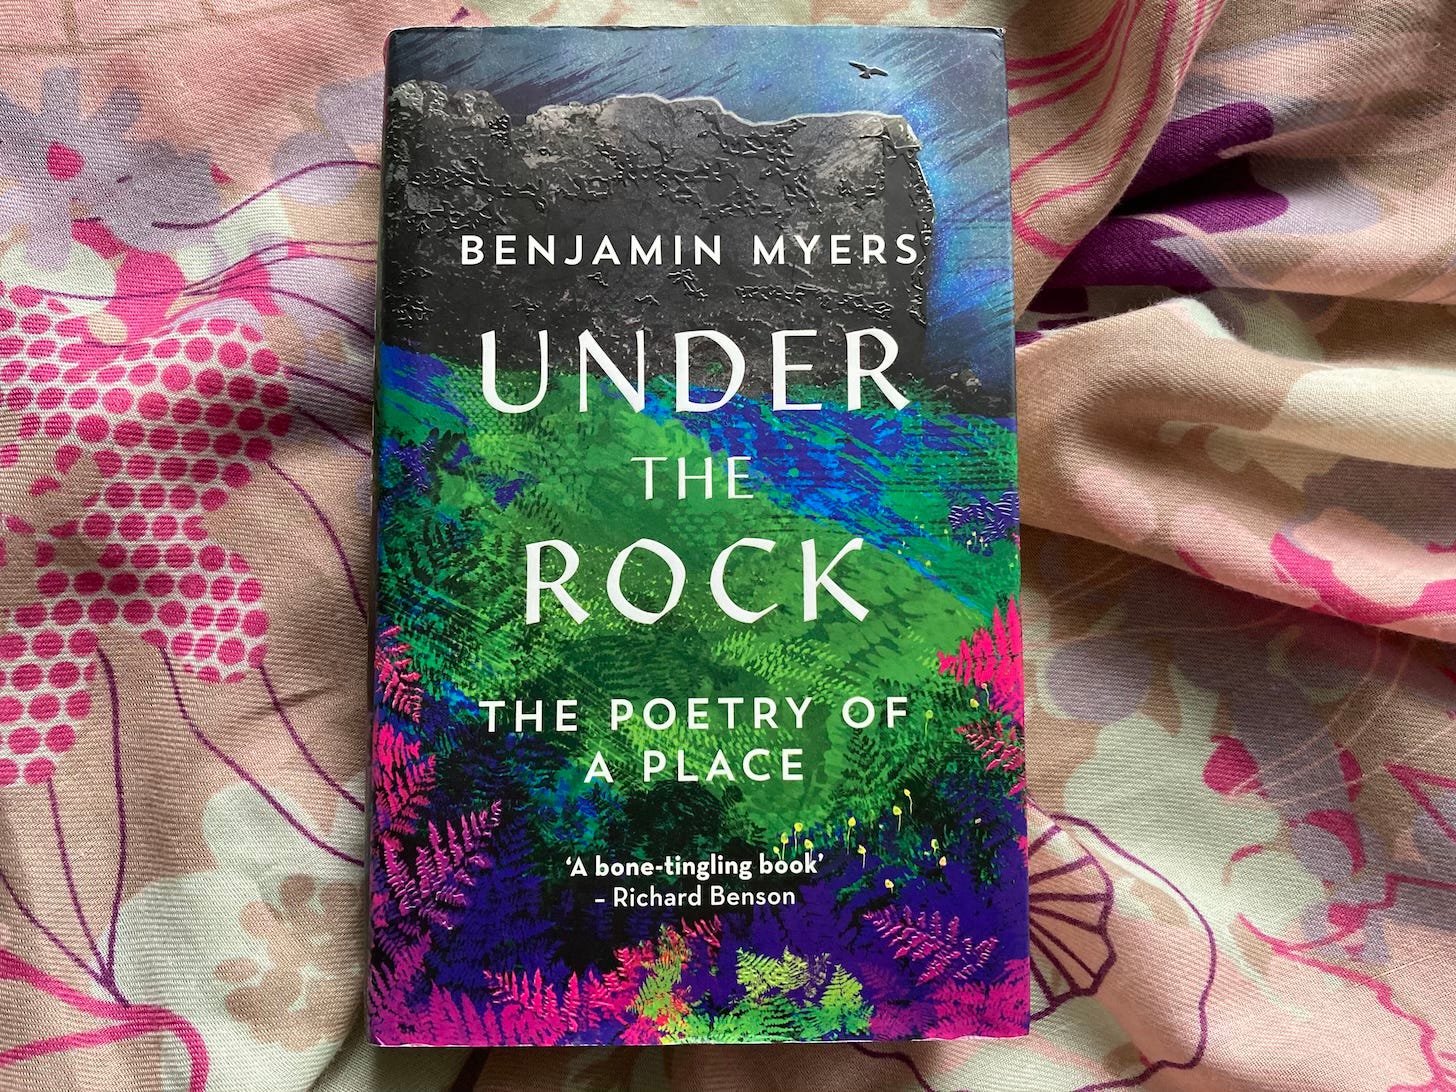 Colourful book cover of Under the Rock by Benjamin Myers